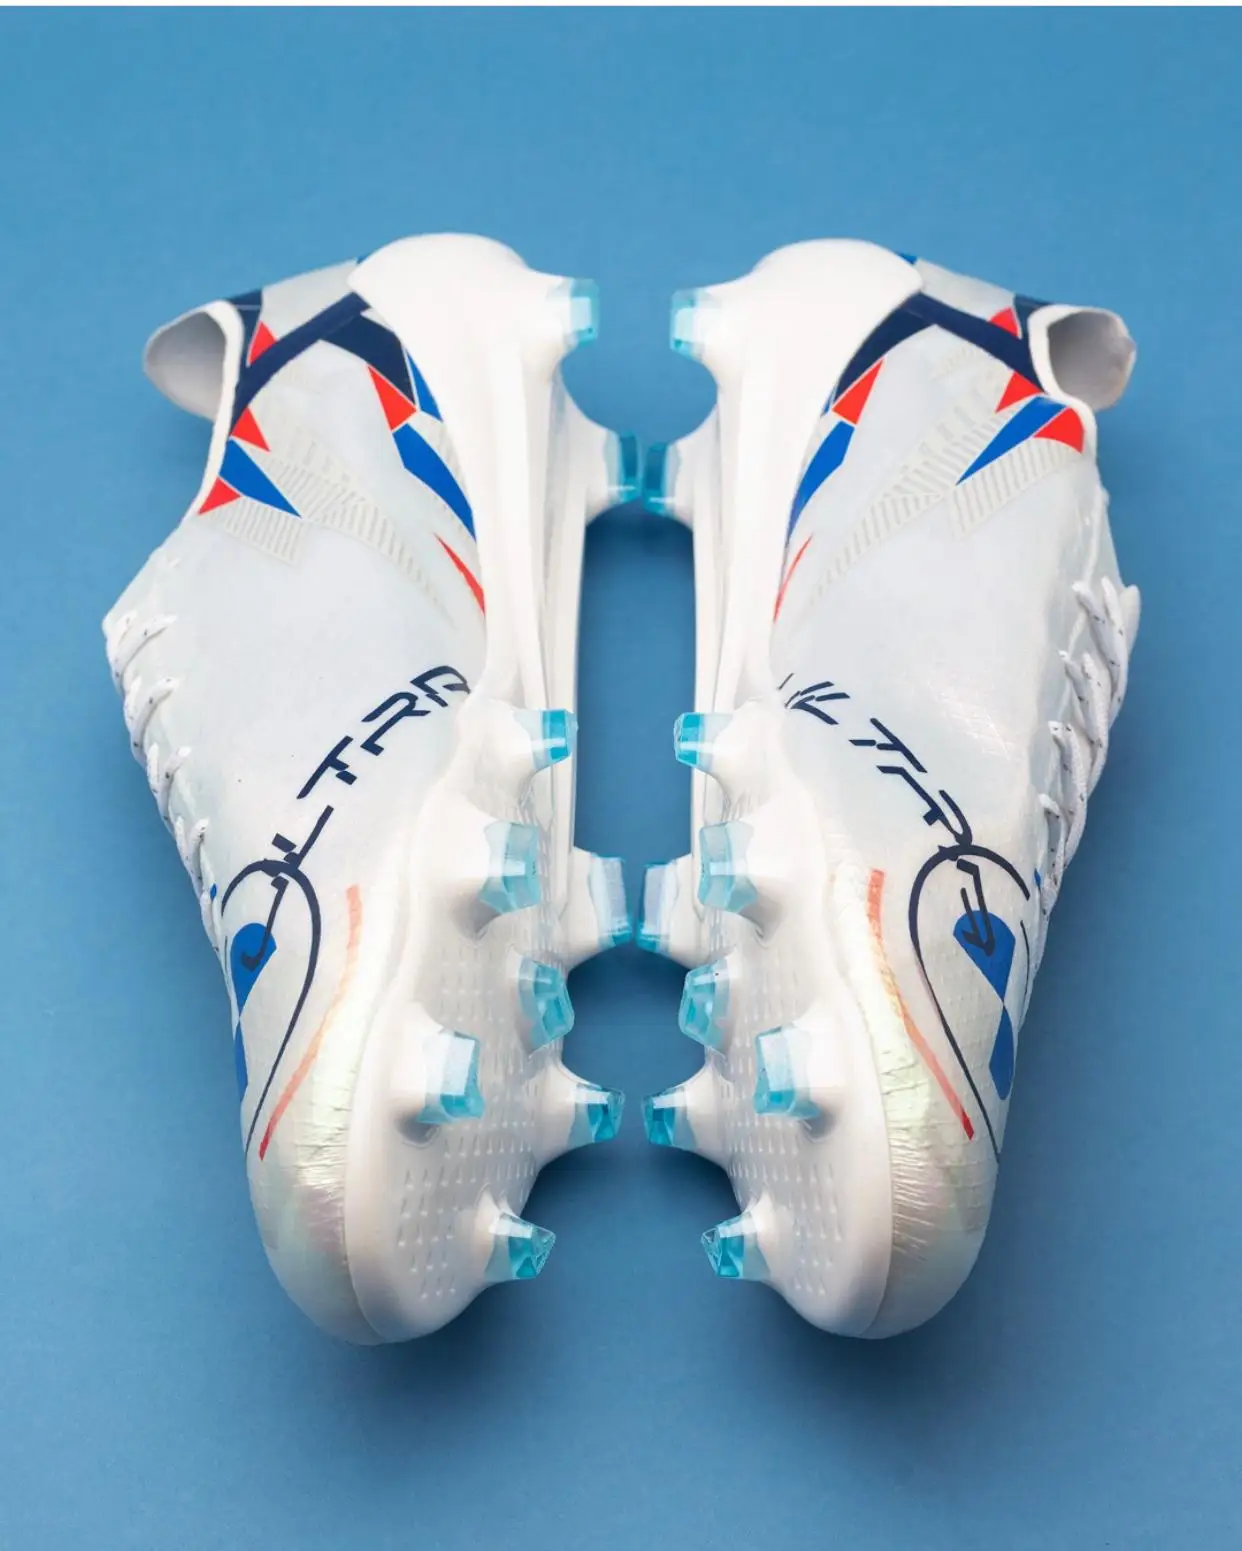 Football Soccer Shoes High Standard Used Brand Football Shoes Men ...